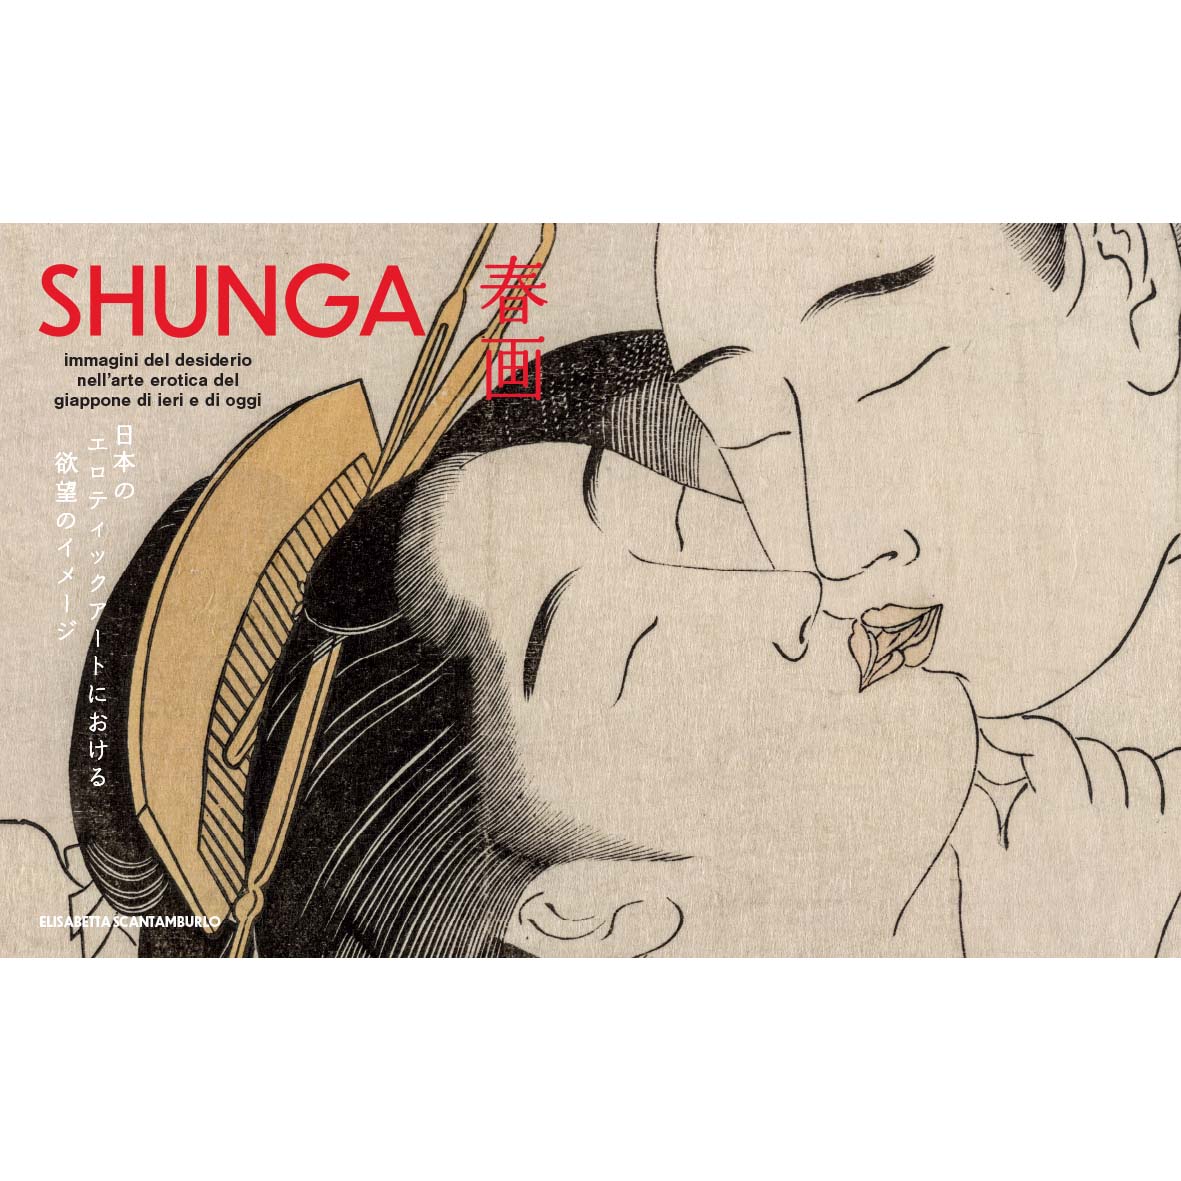 Shunga - Images of desire in the erotic art of Japan yesterday and today